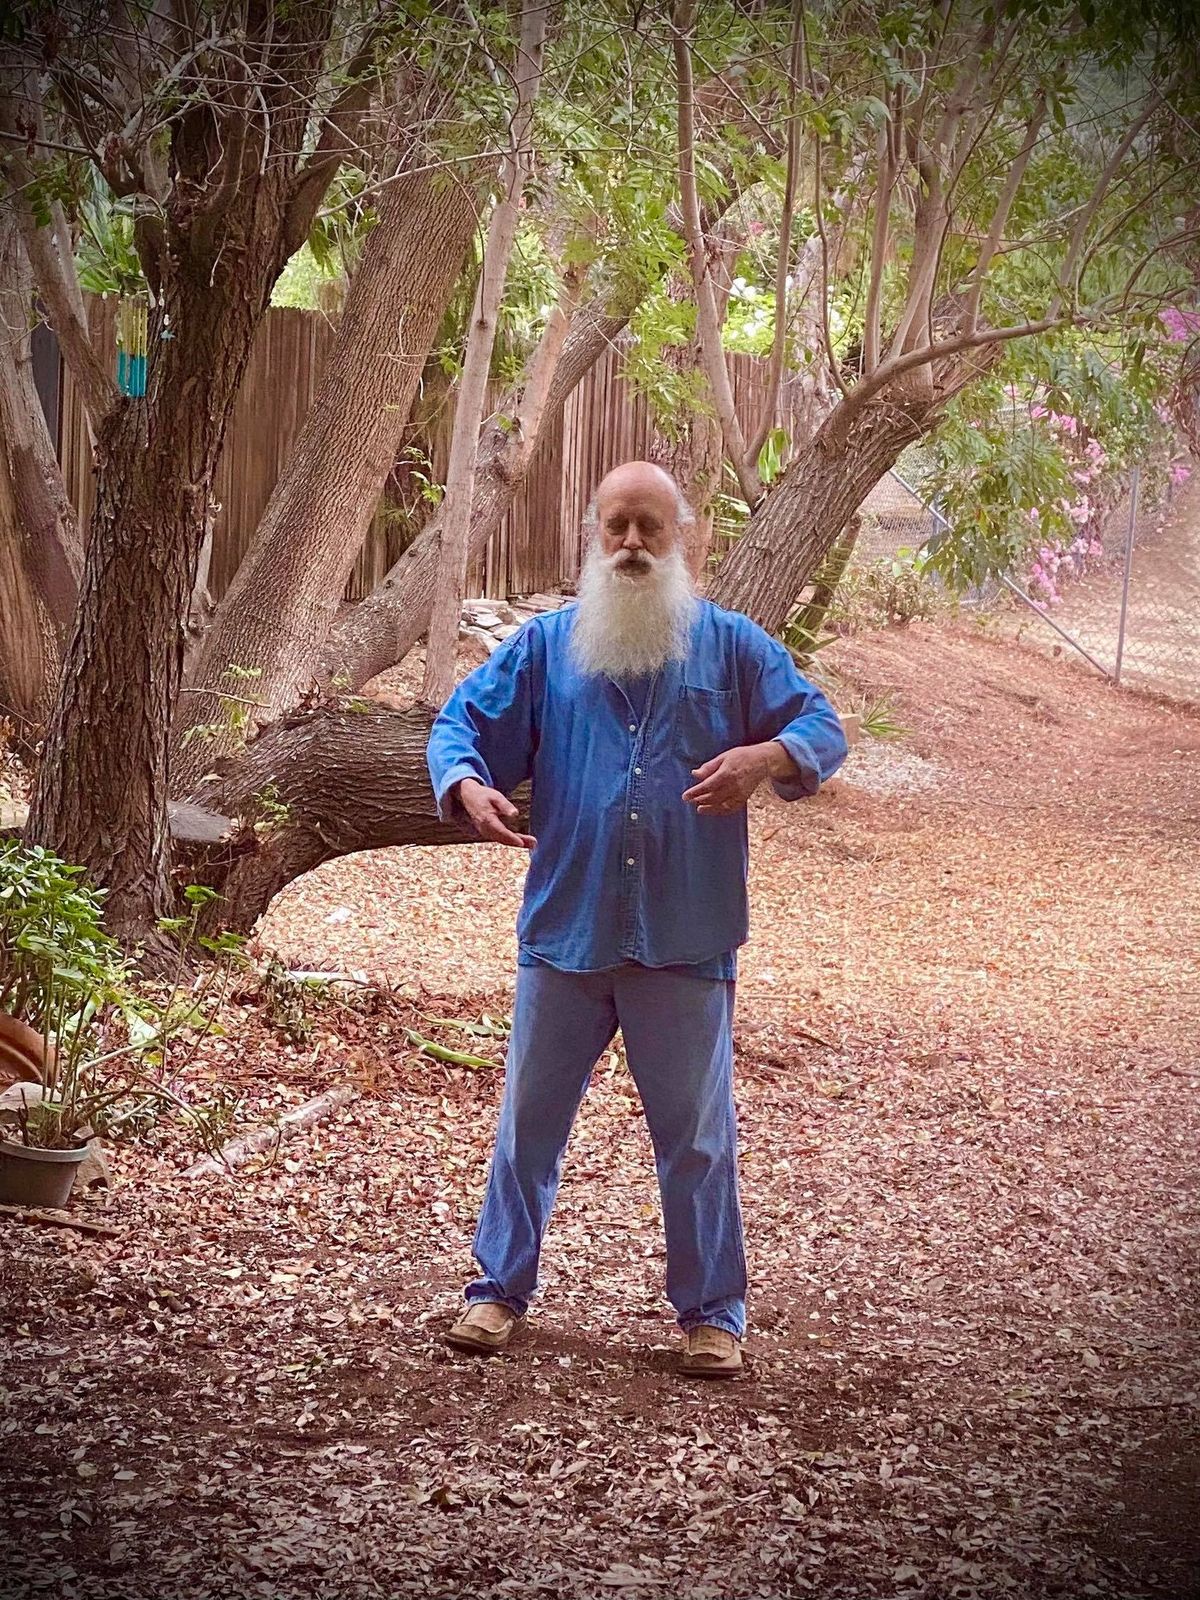 Third Saturday Qigong in the Silver Lake "Wilderness," 9-10AM. Freely offered. Donations accepted